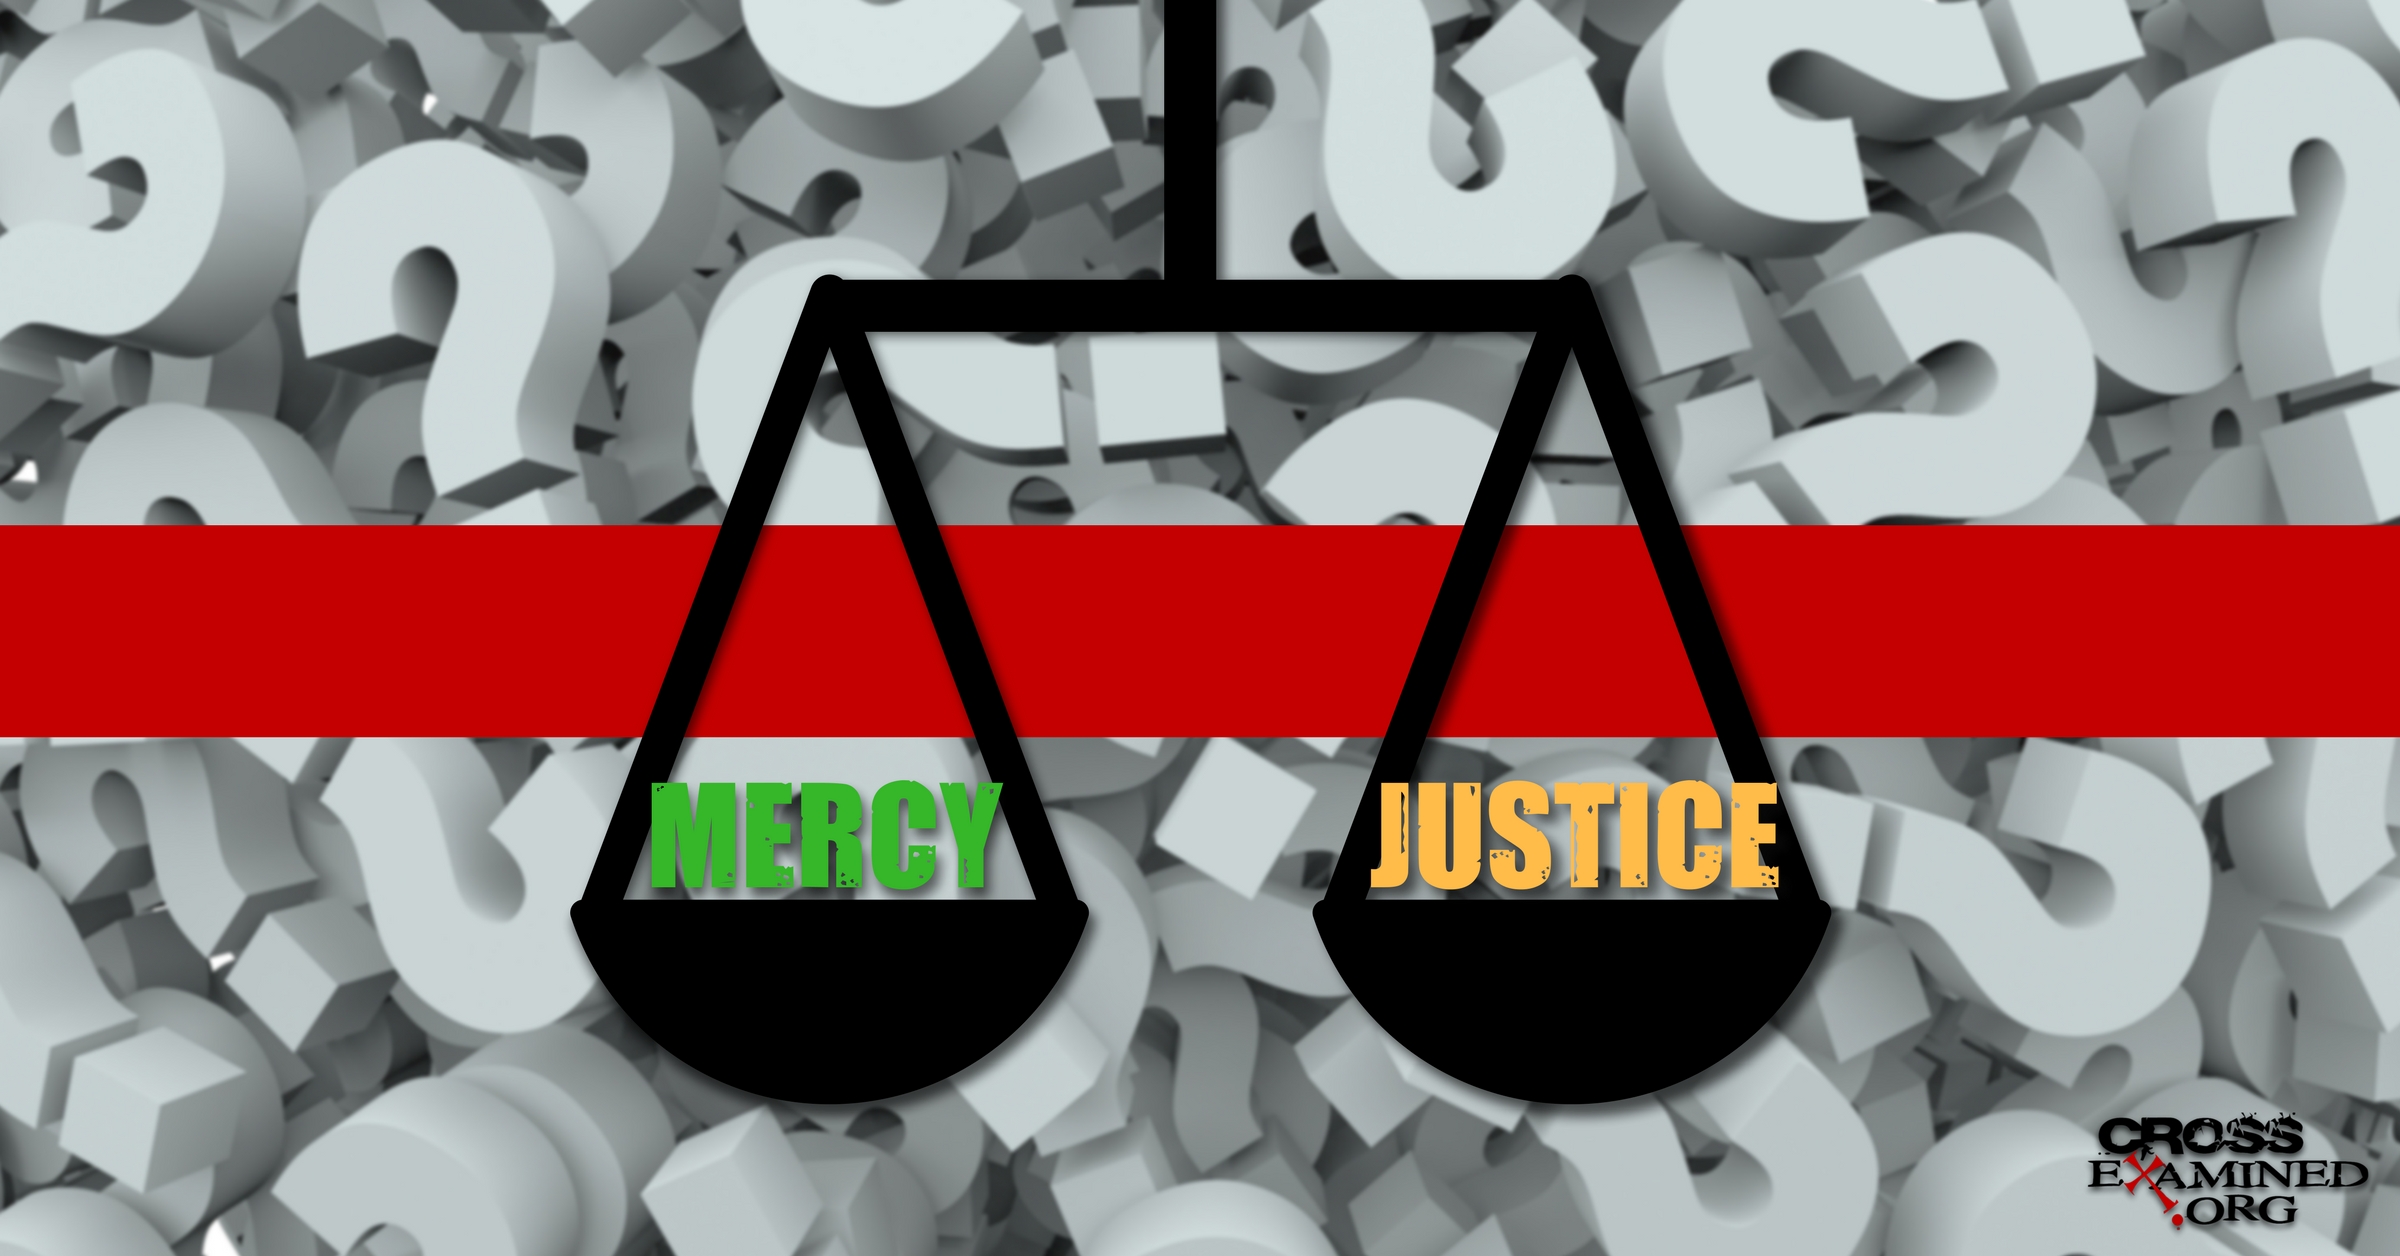 Can God Balance Mercy and Justice?